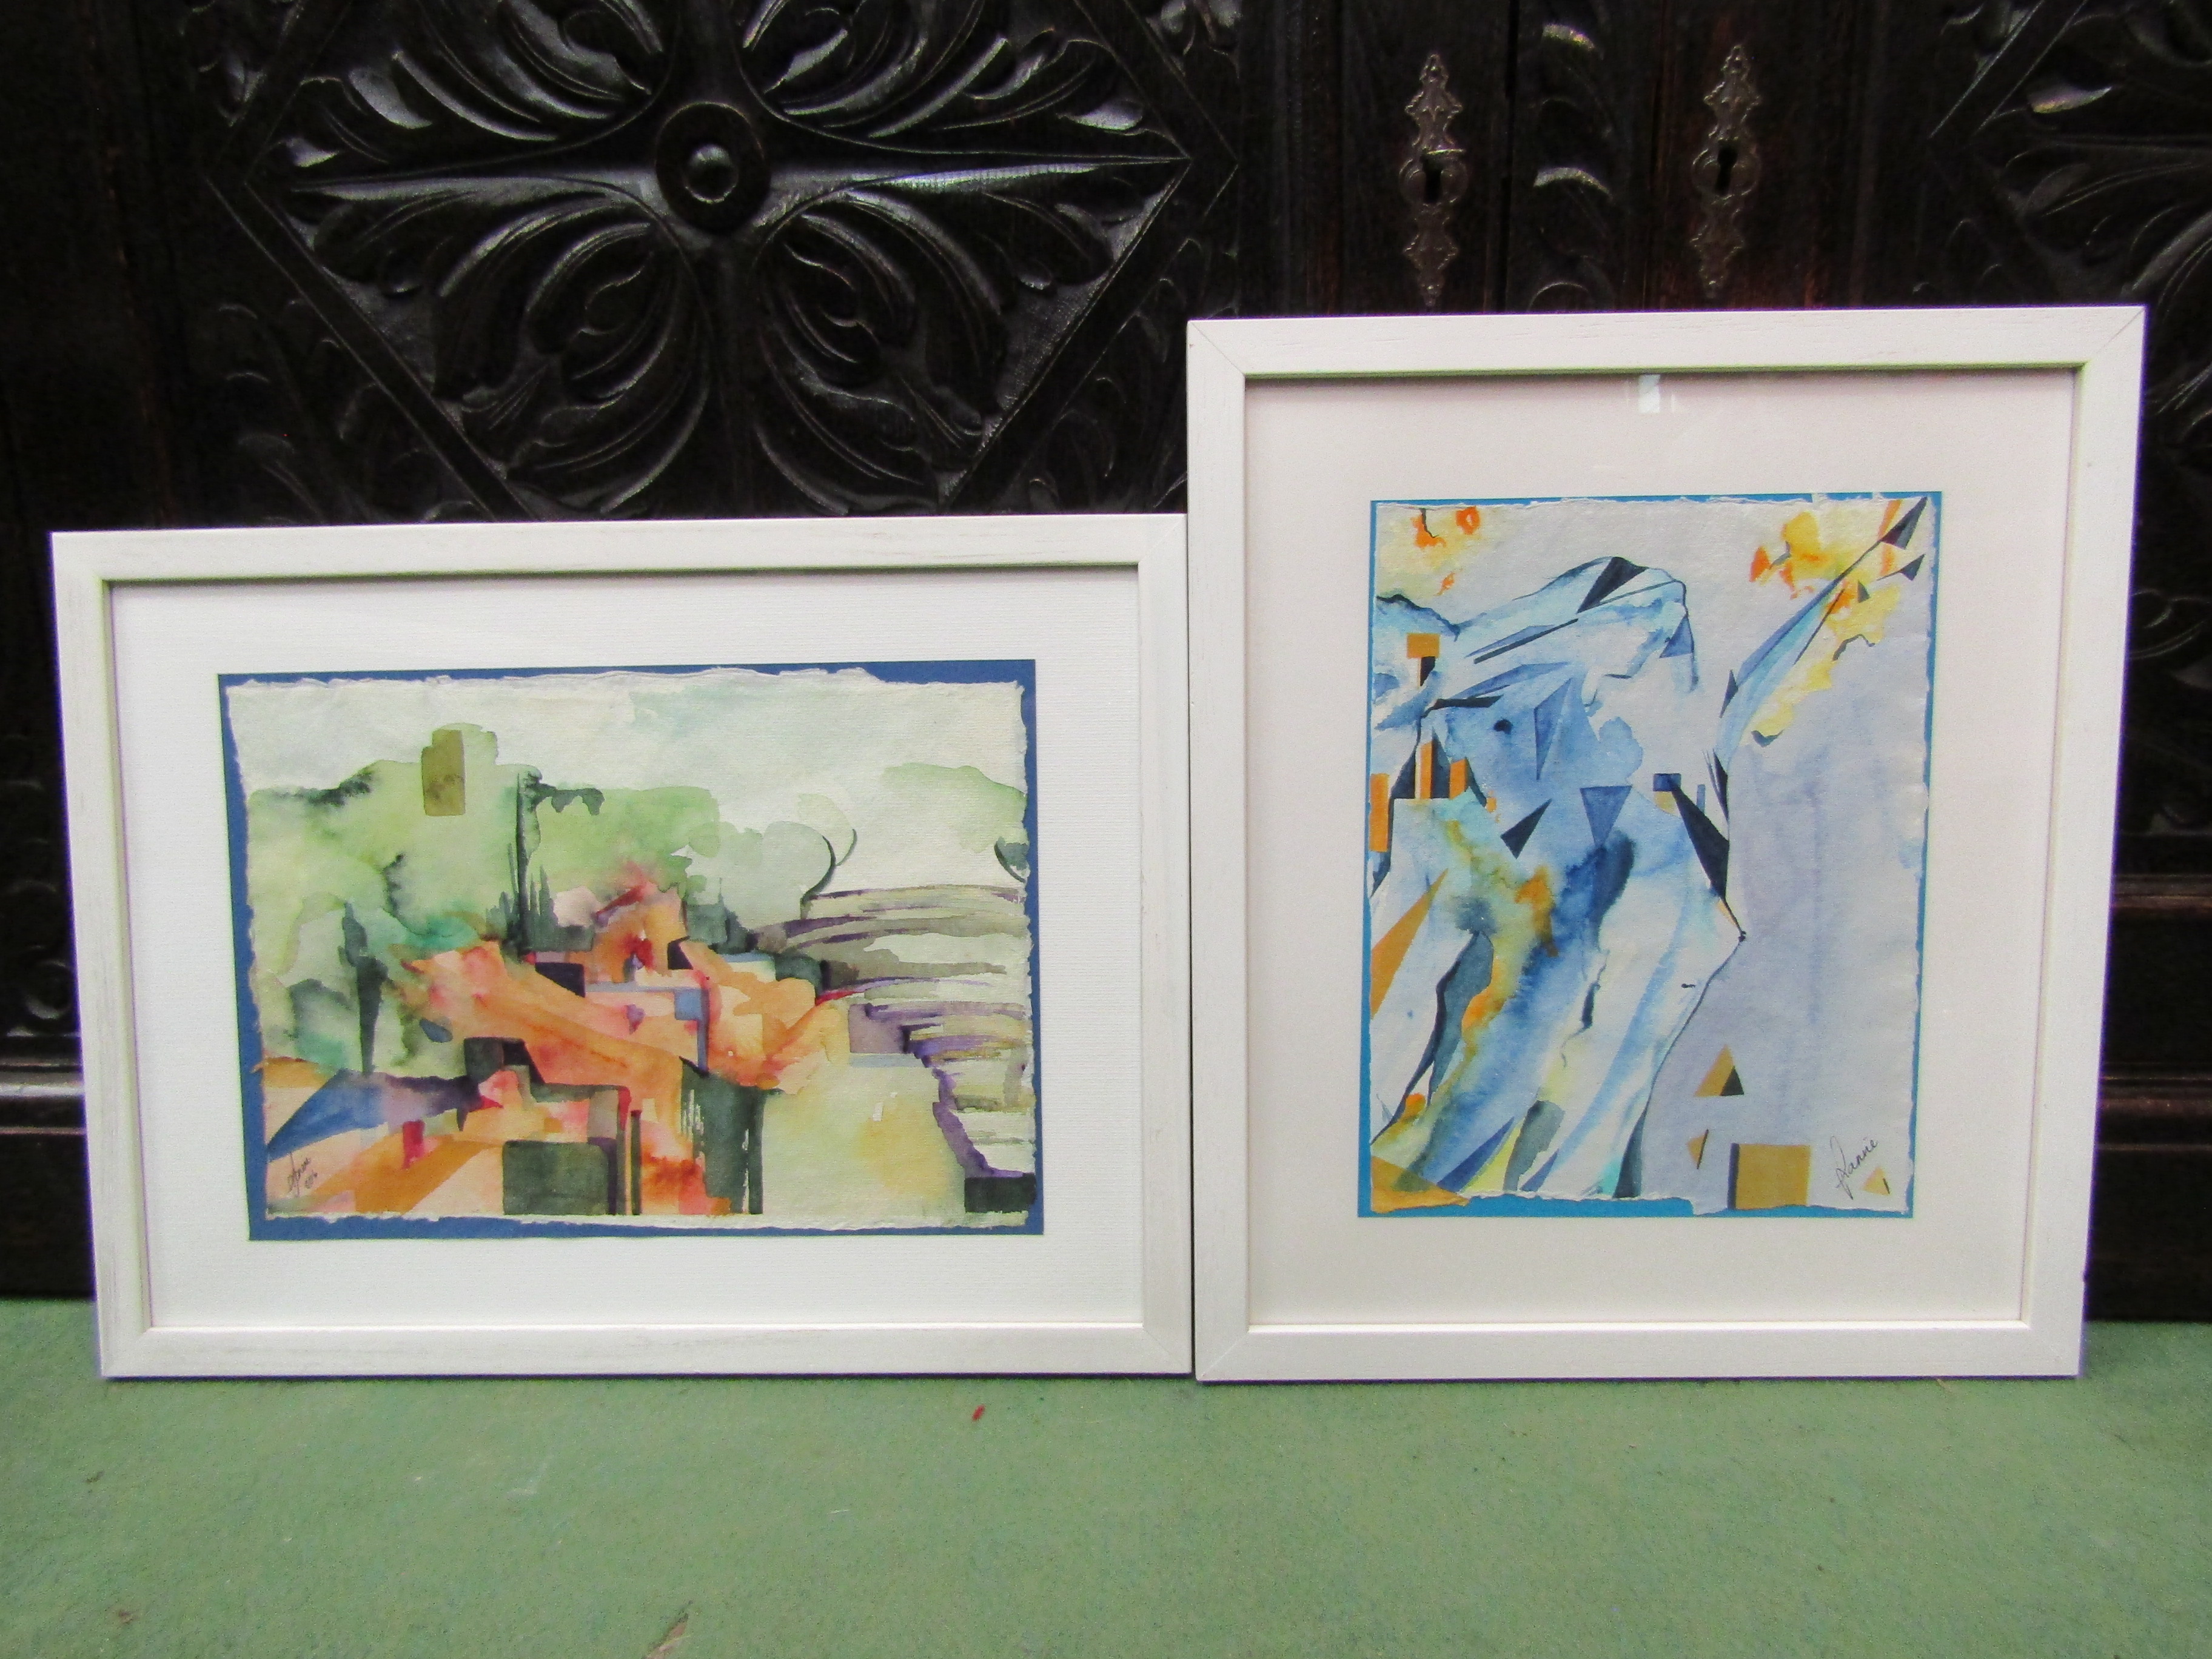 JANINE REEVES: Two abstract scene watercolours, ancient site, ruins and Apollo Adaphne, both signed,